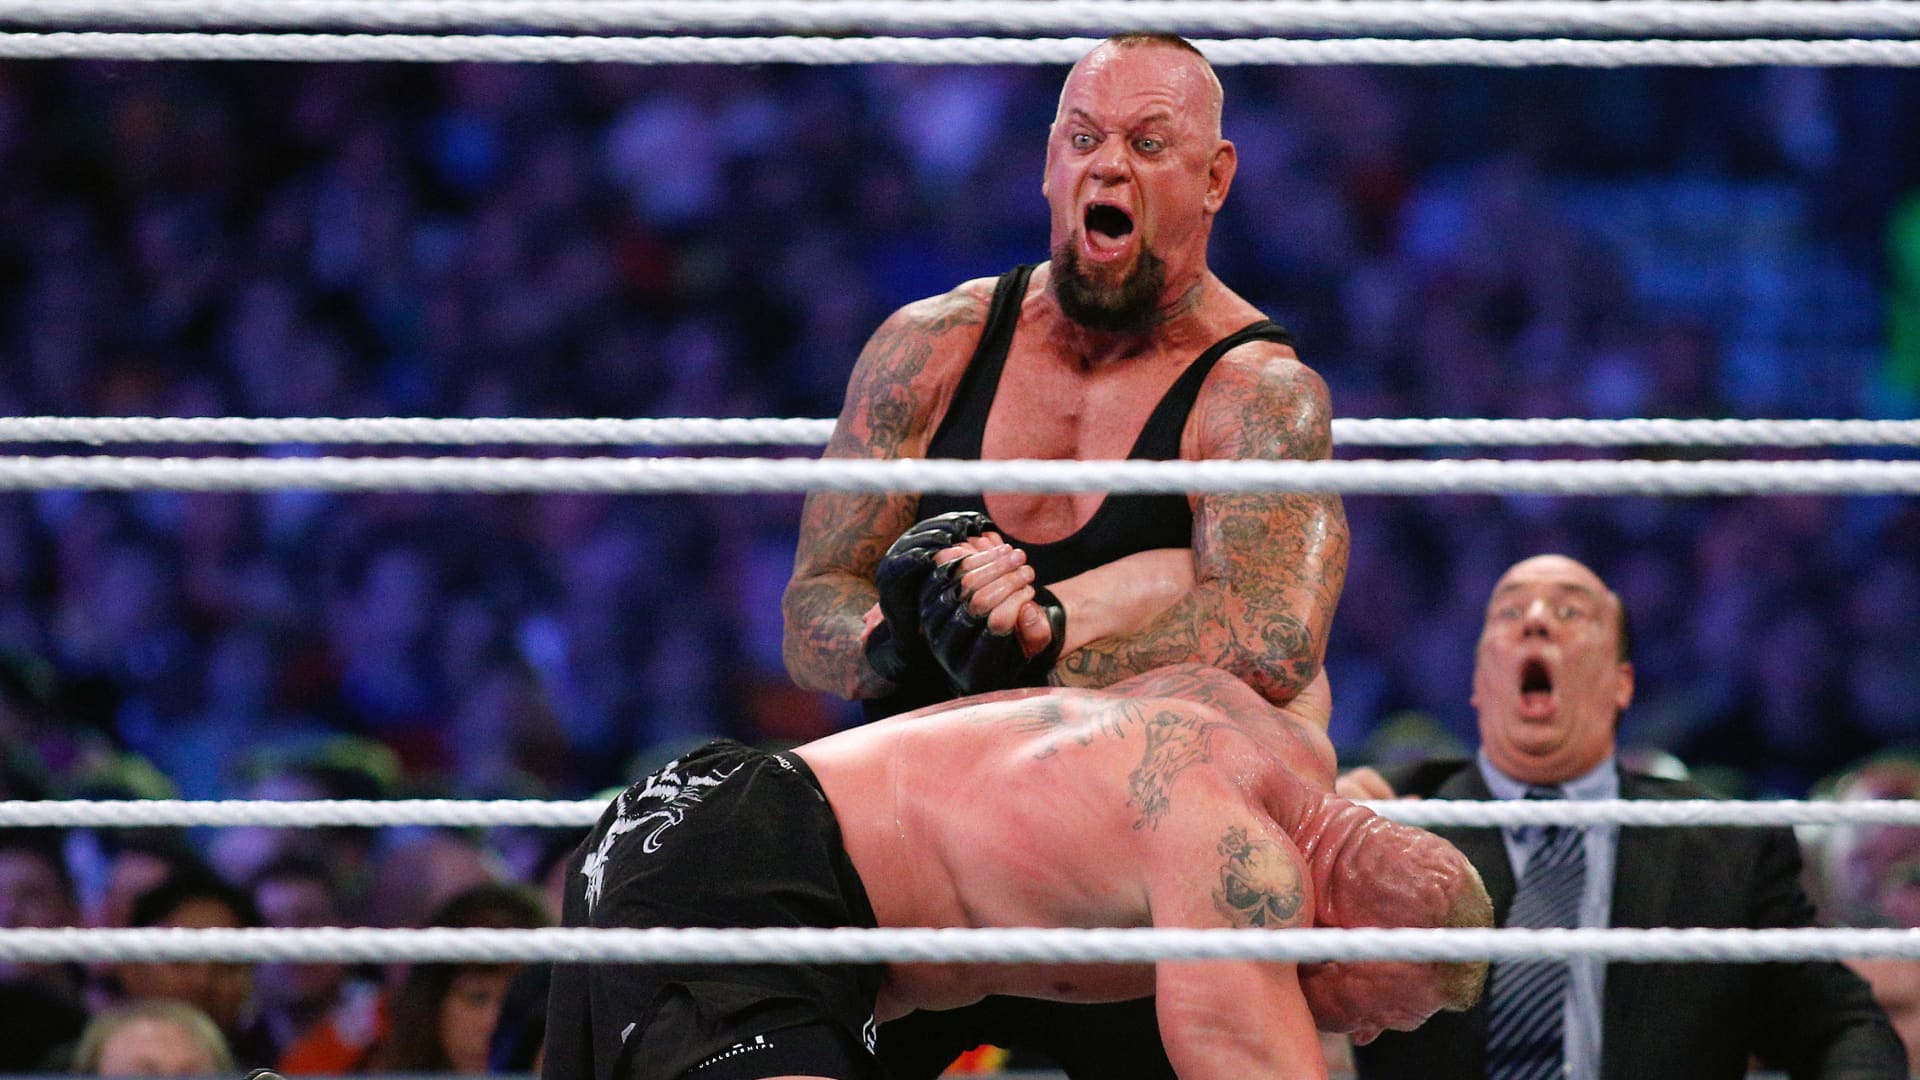 The Undertaker, top, and Brock Lesnar wrestle during Wrestlemania XXX at the Mercedes-Benz Super Dome in New Orleans on Sunday, April 6, 2014.